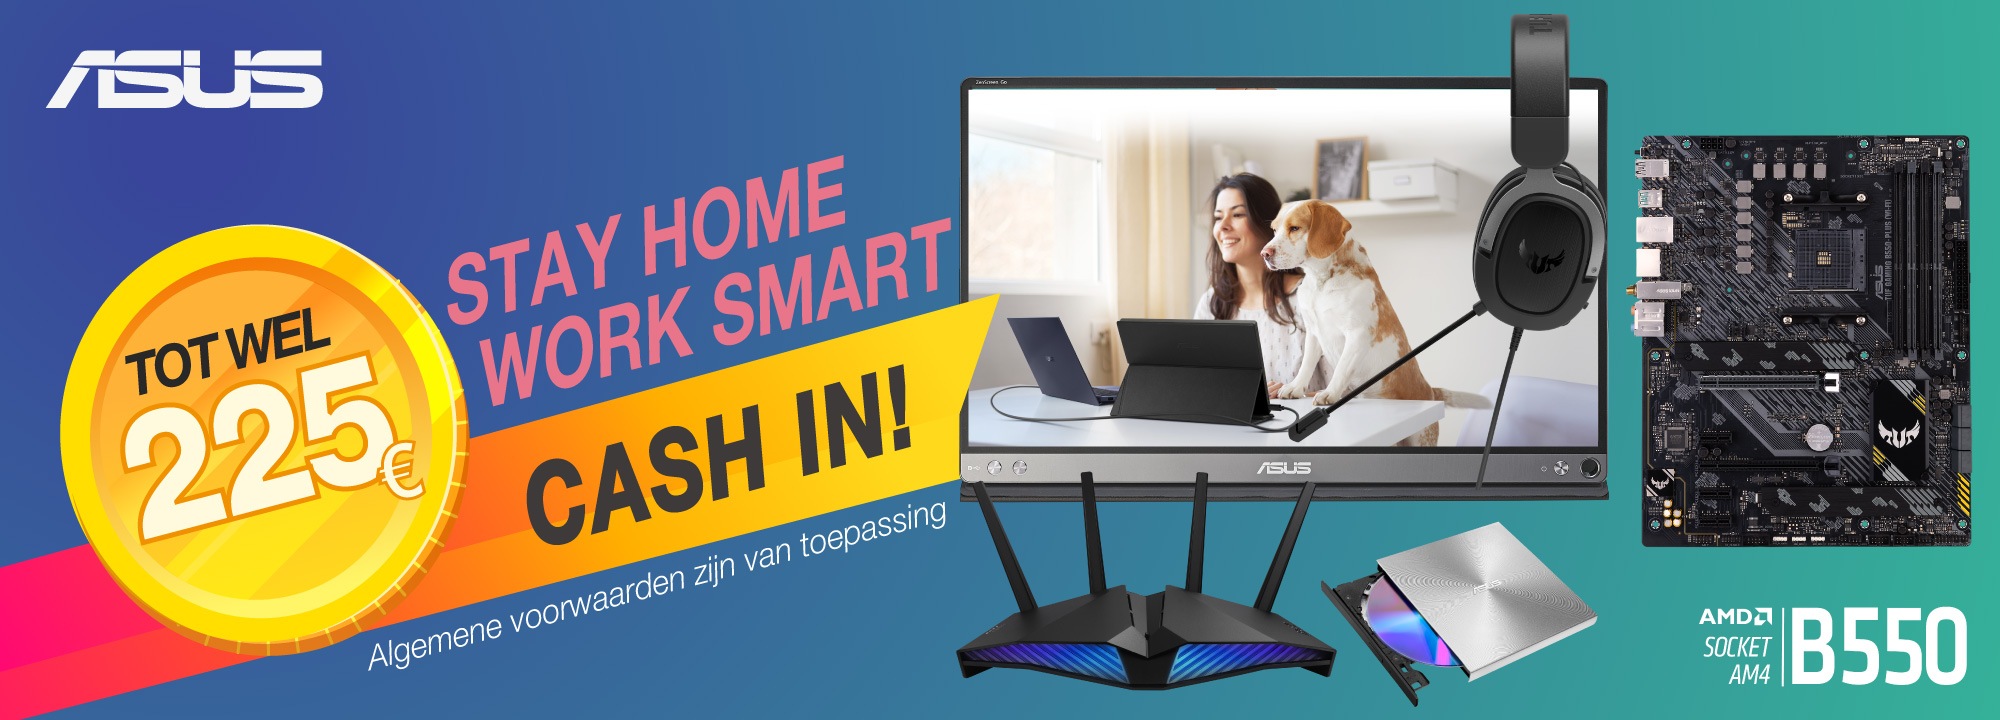 Asus Stay home, work smart